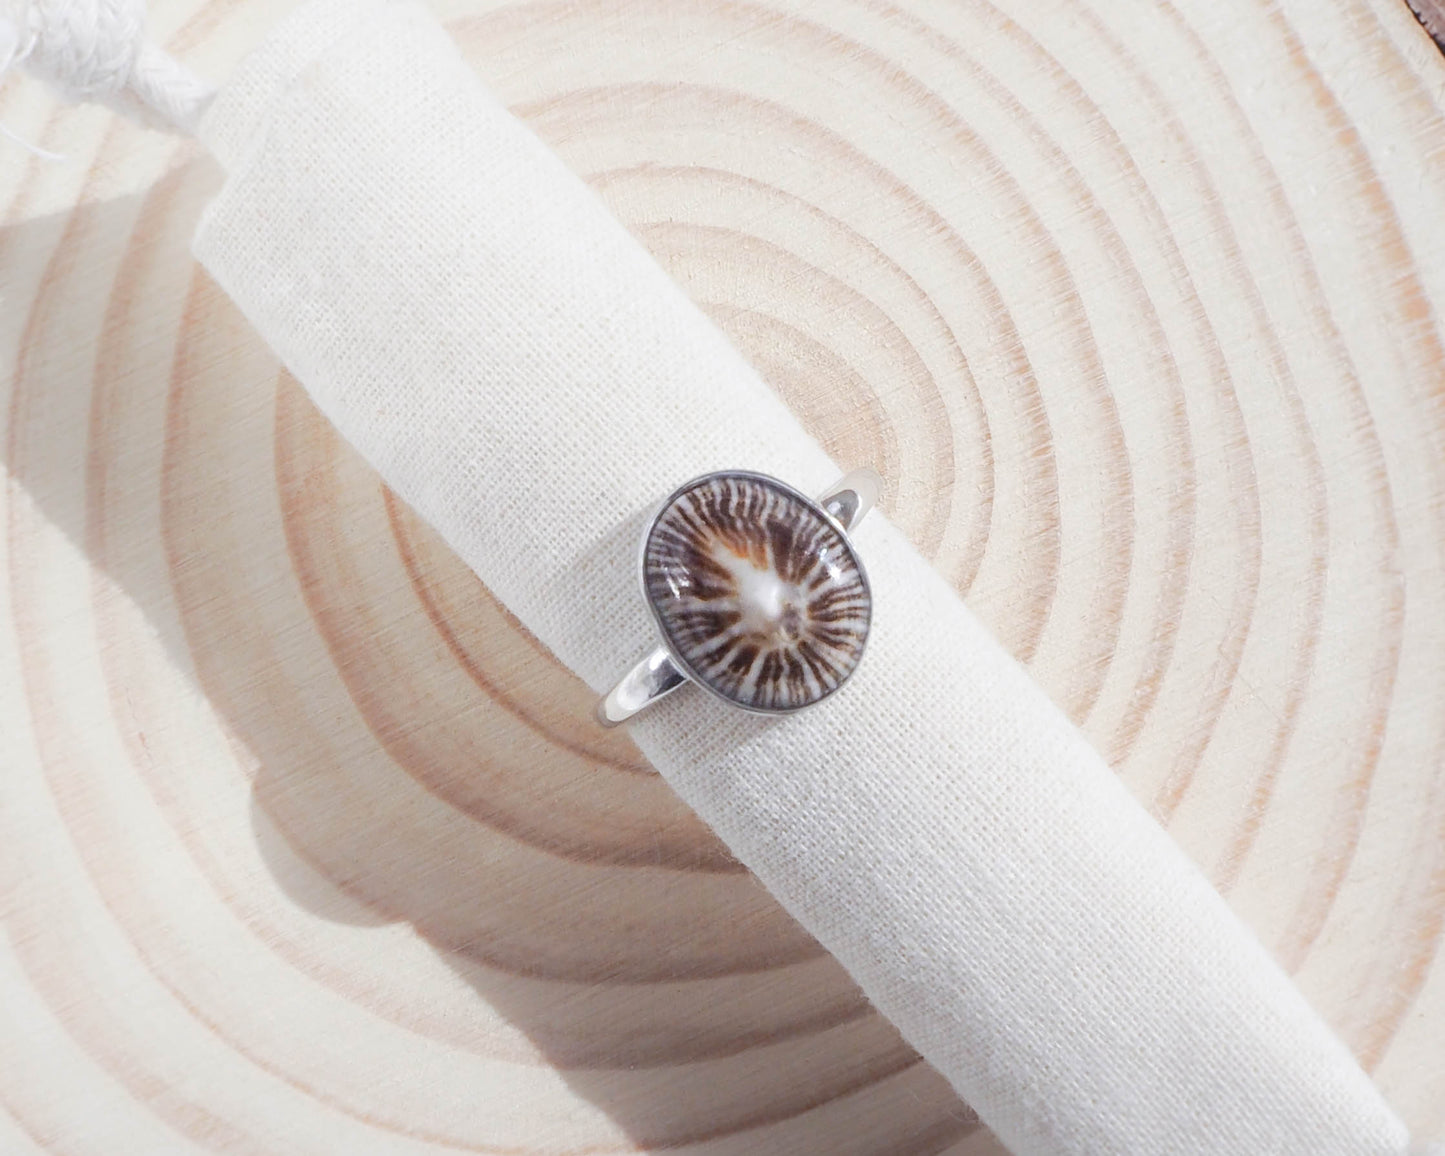 925 Silver Ring from Portugal, Limpet Shell, Algarve, Sea by lou,925 Silver Jewelry, Portugal Souvenir, Beach Wedding Accessory